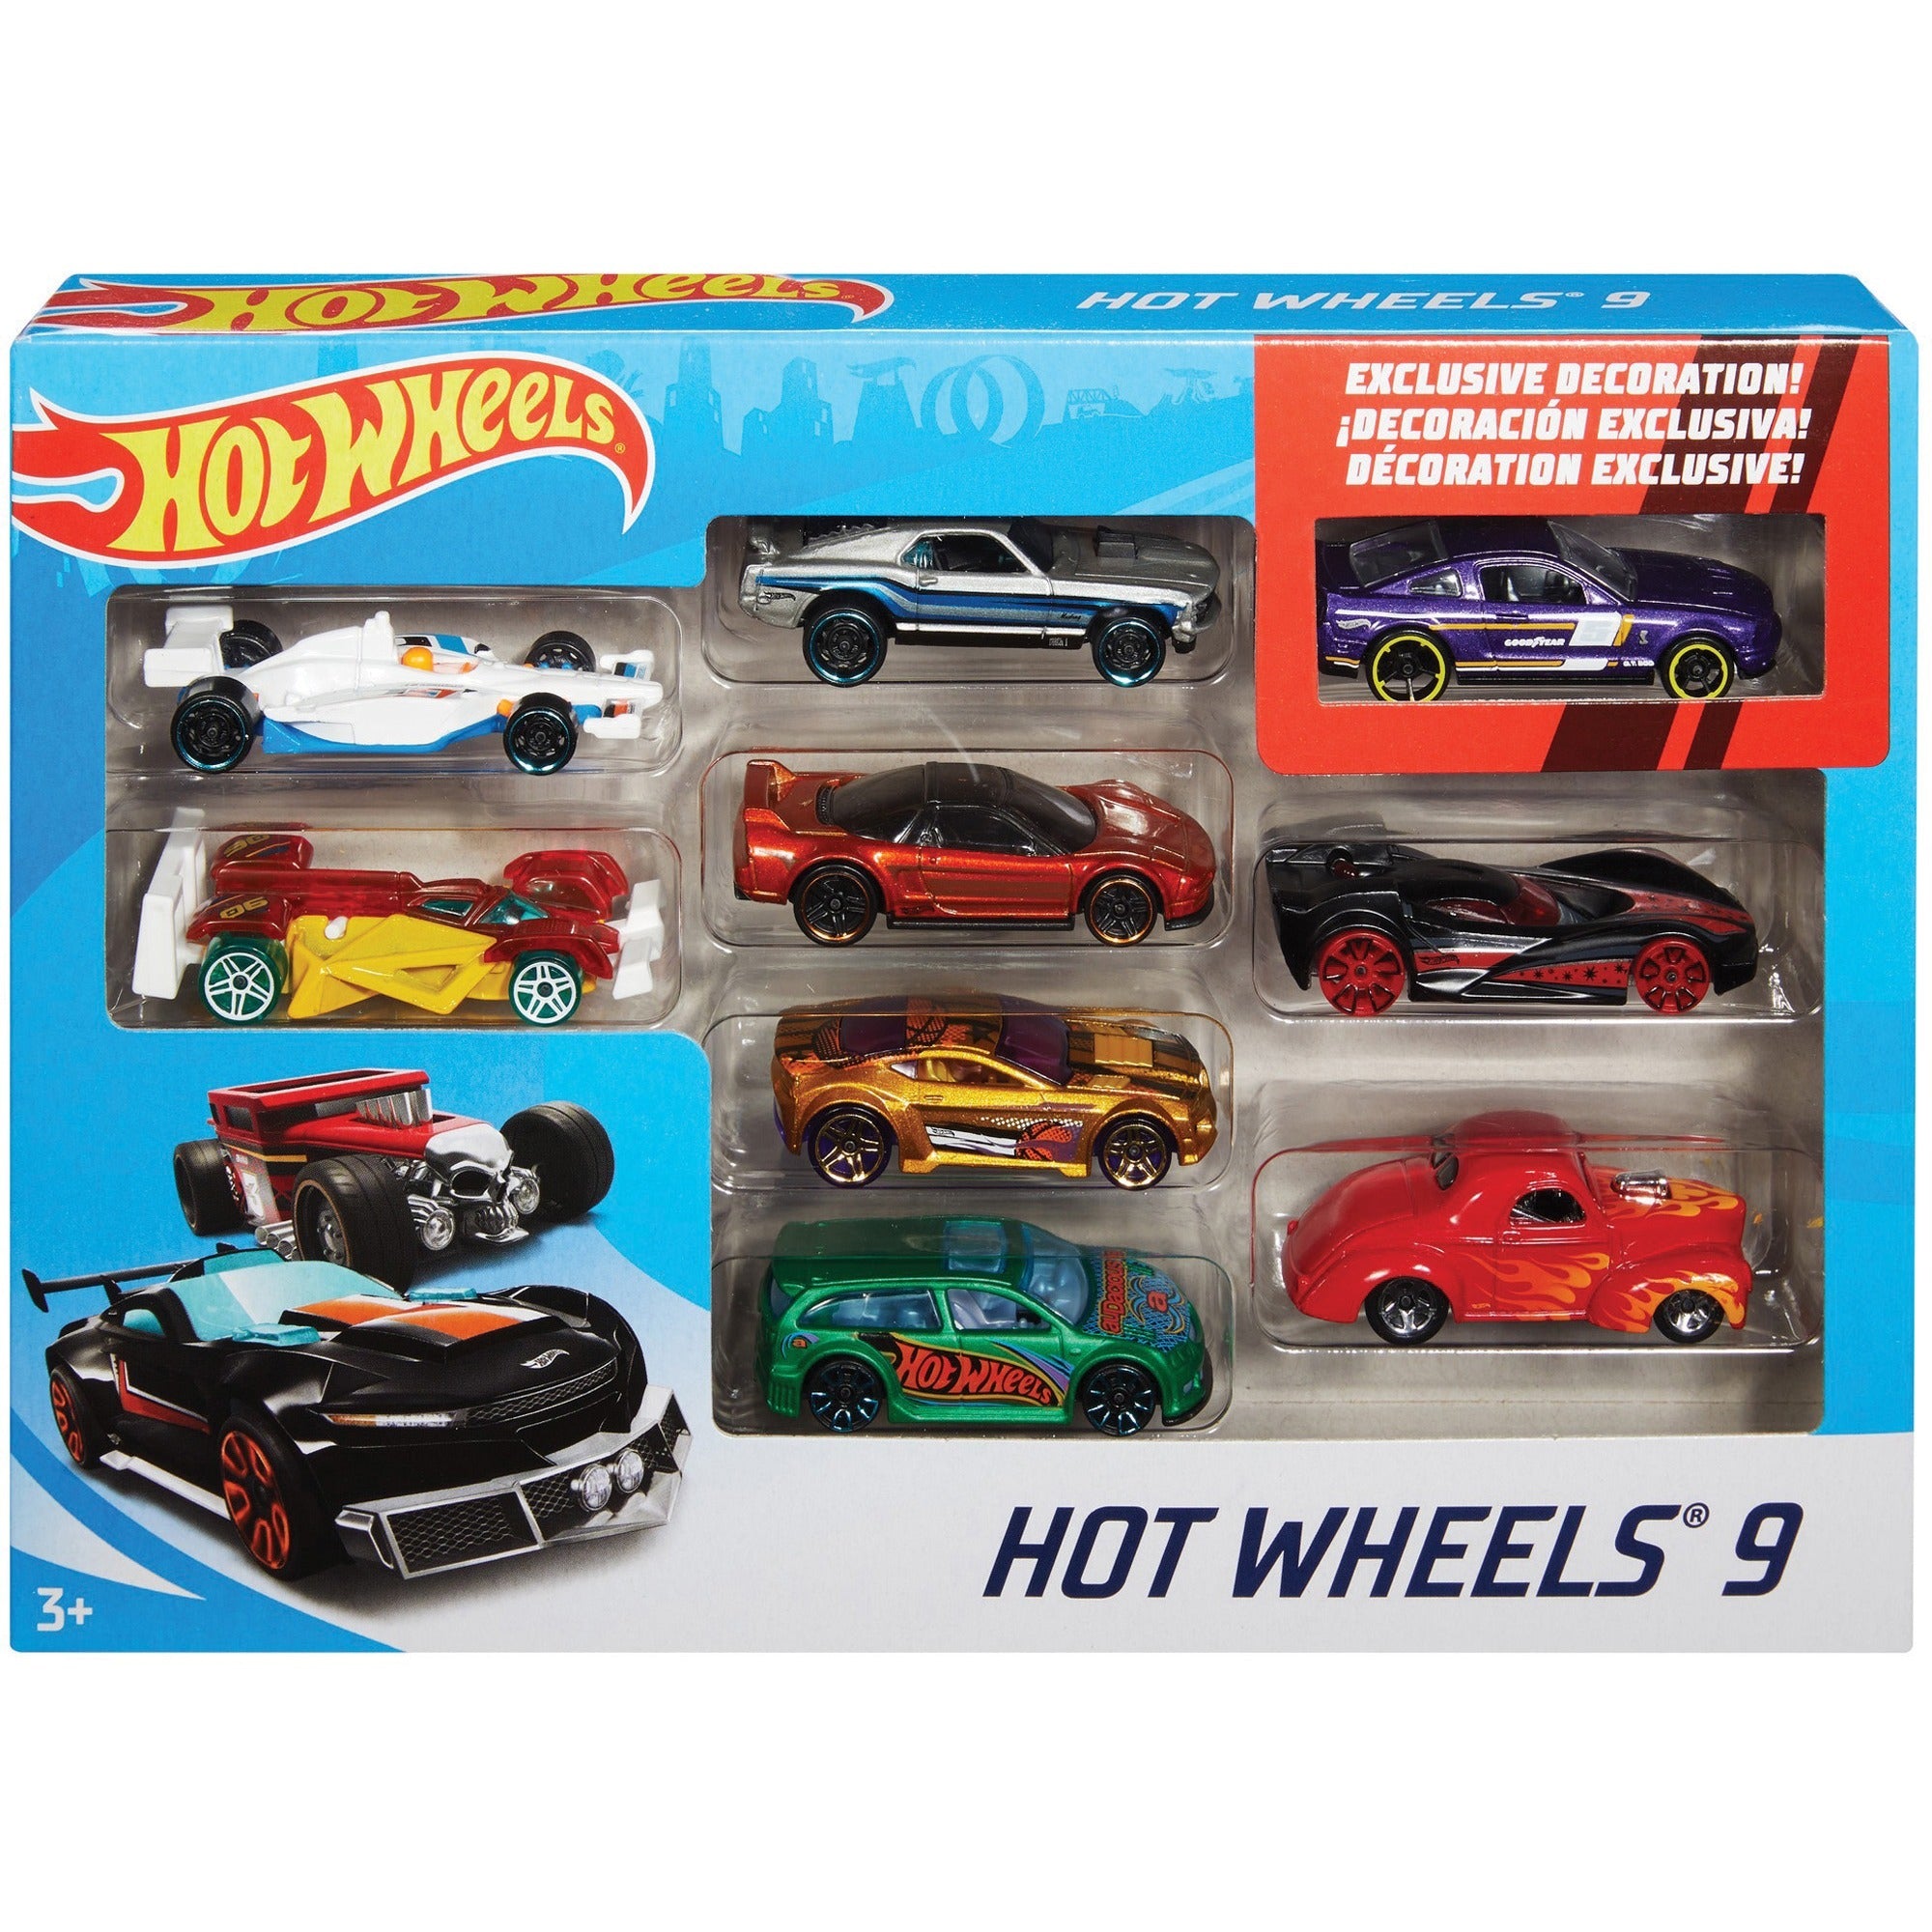 mattel-hot-wheels-9-car-gift-pack-genuine-die-cast-parts-makes-a-great-gift-for-kids-and-collectors_mttx6999 - 1